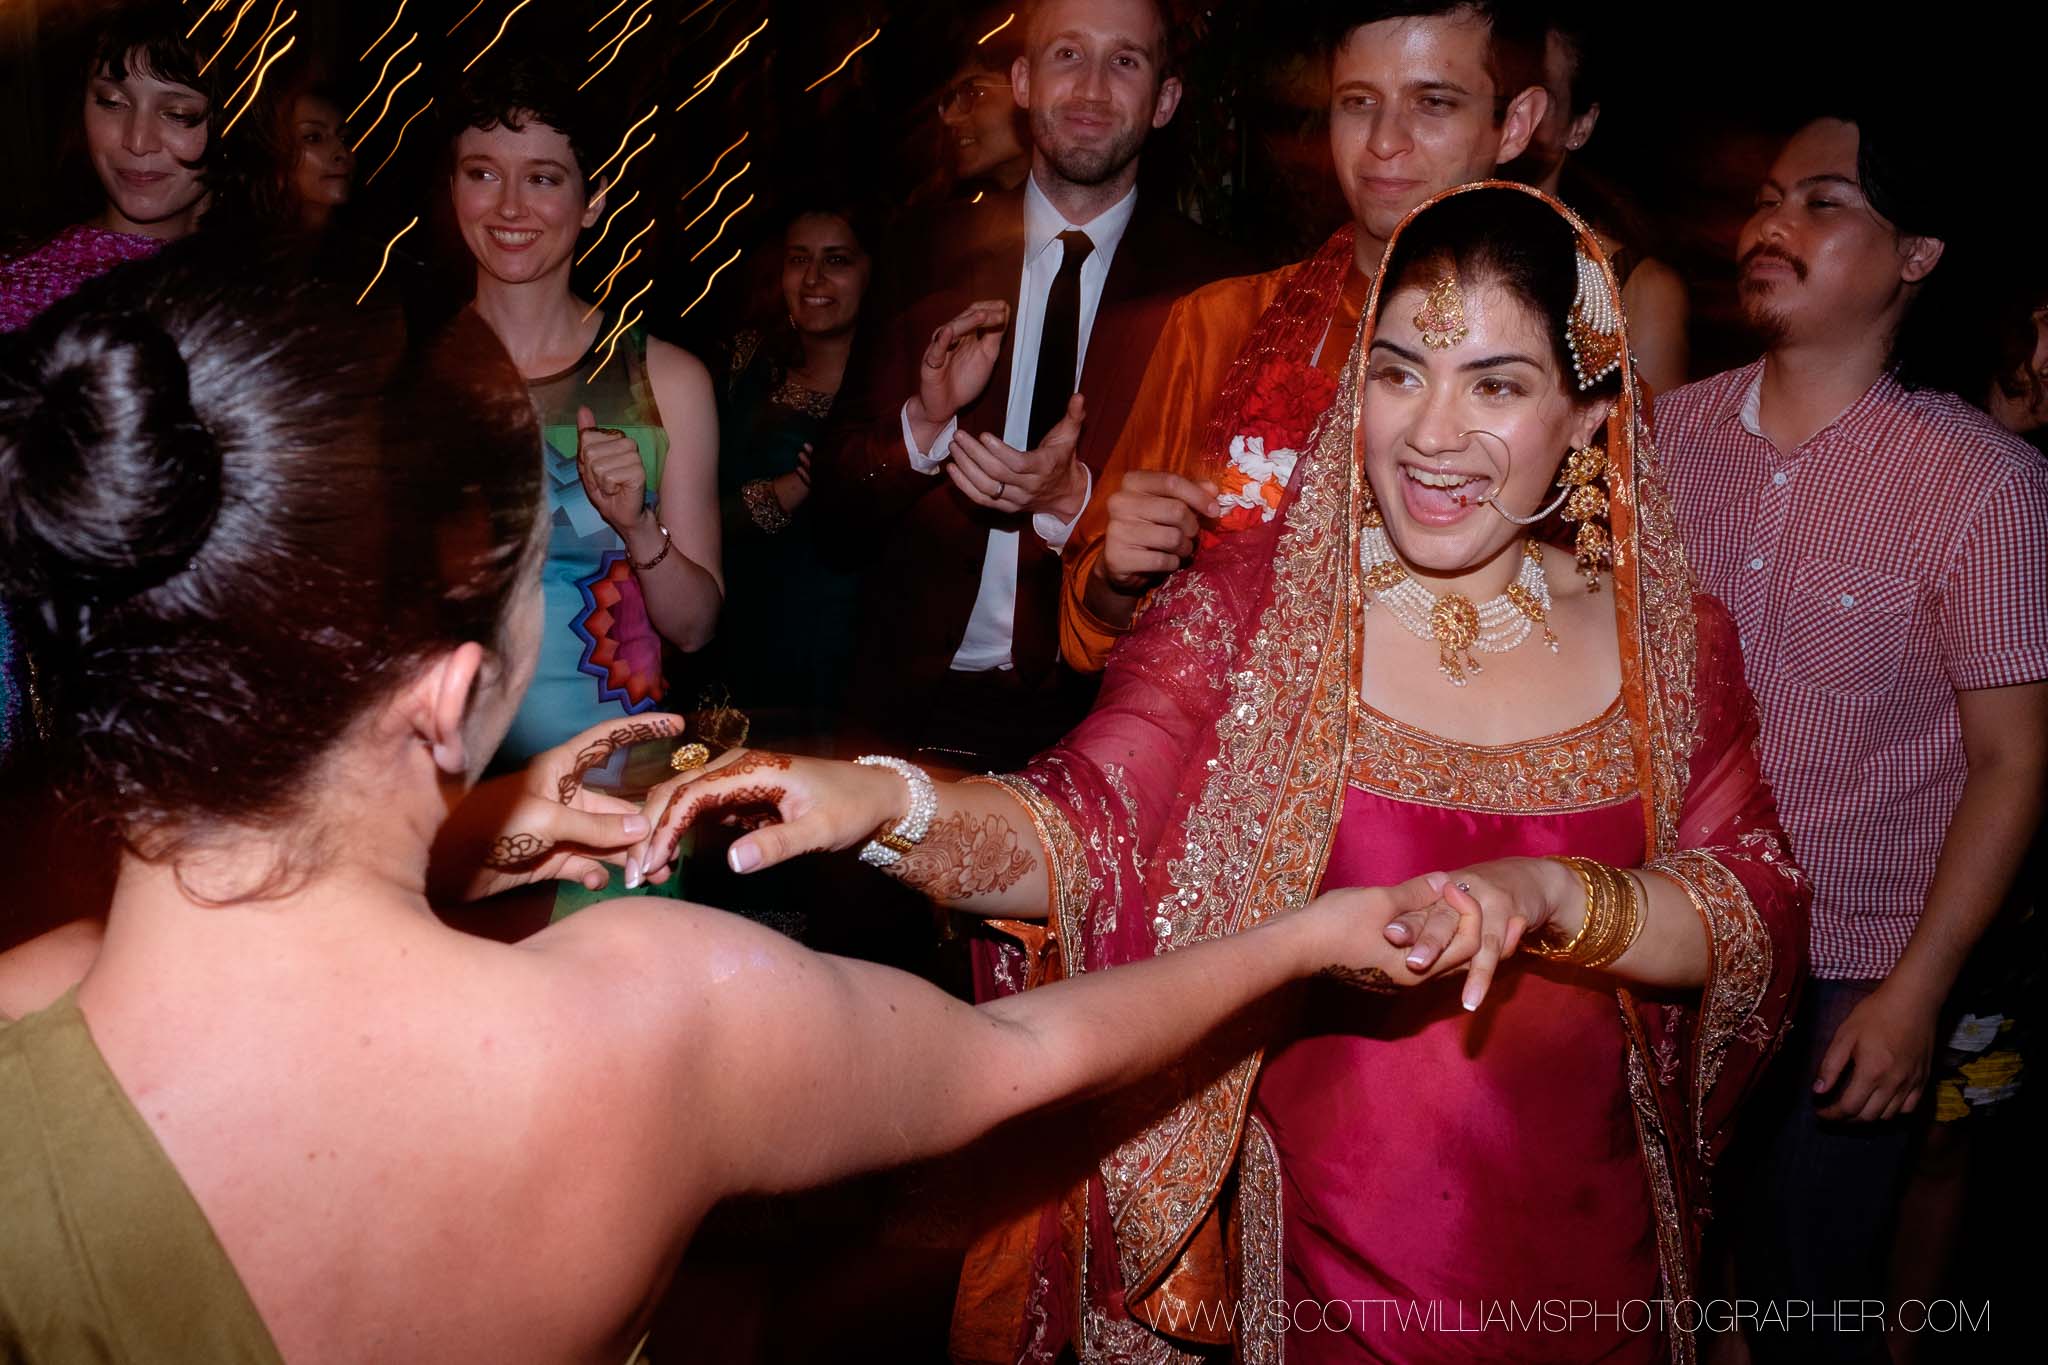  The bride dances with guests during the wedding reception of her backyard wedding in Burlington, Ontario. 